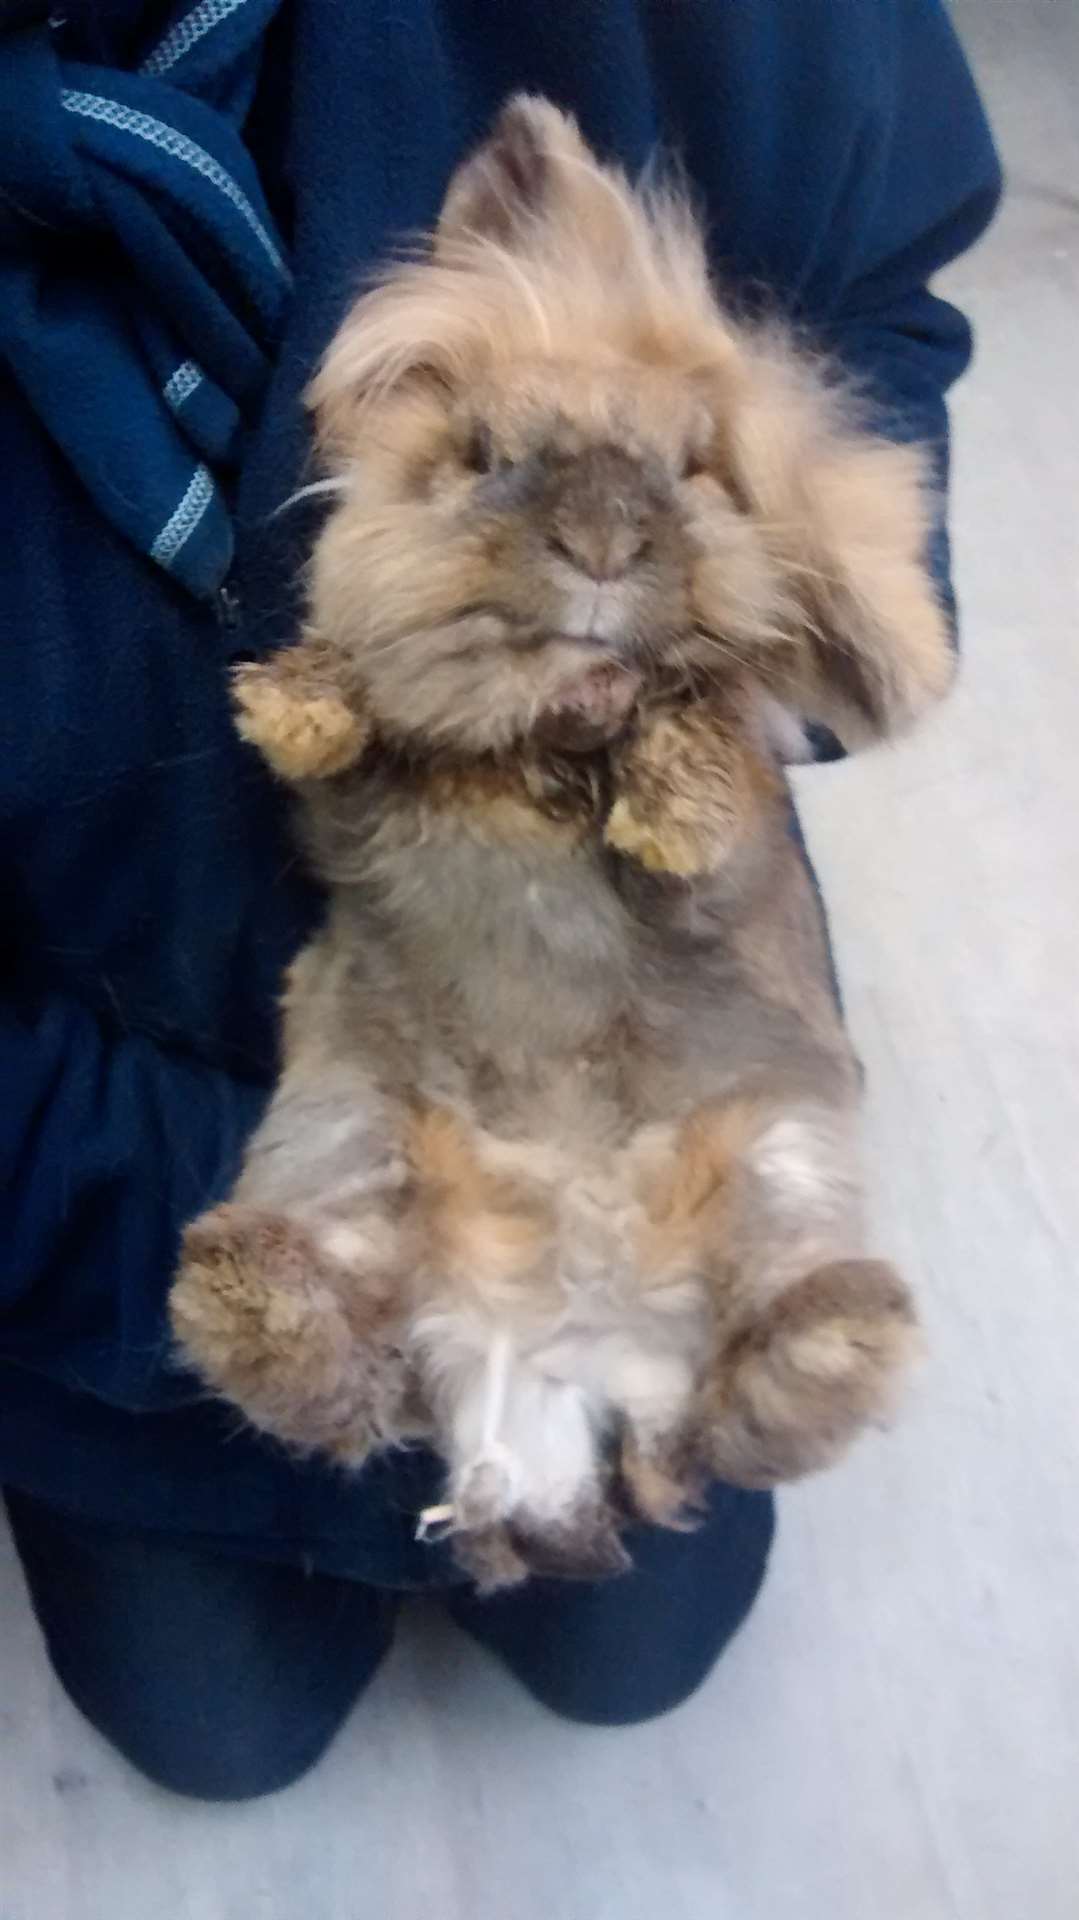 One of the rabbits found in Plains Avenue yesterday